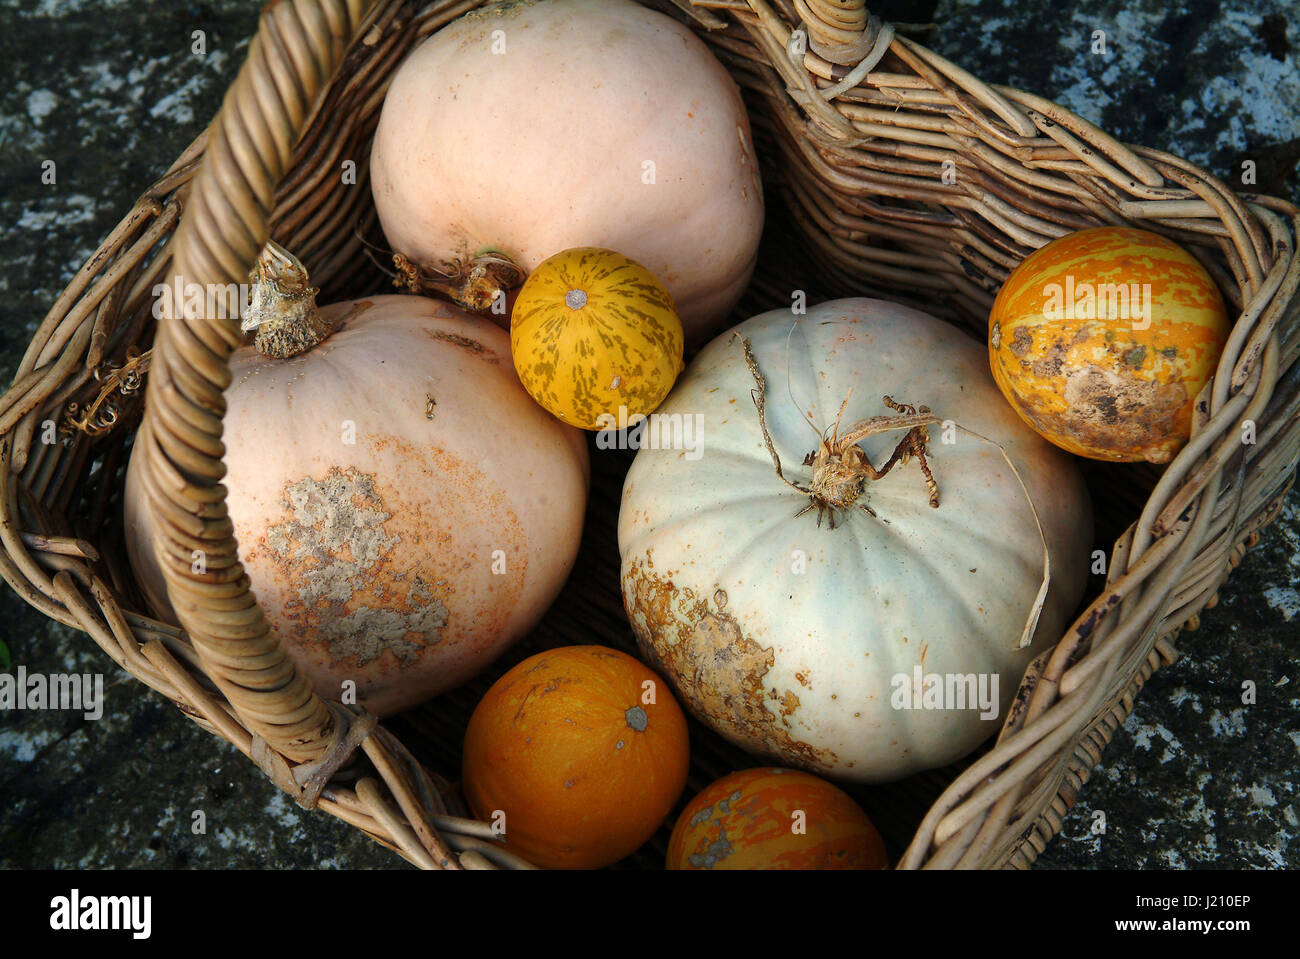 A selection of squashes/pumpkins in a basket Stock Photo